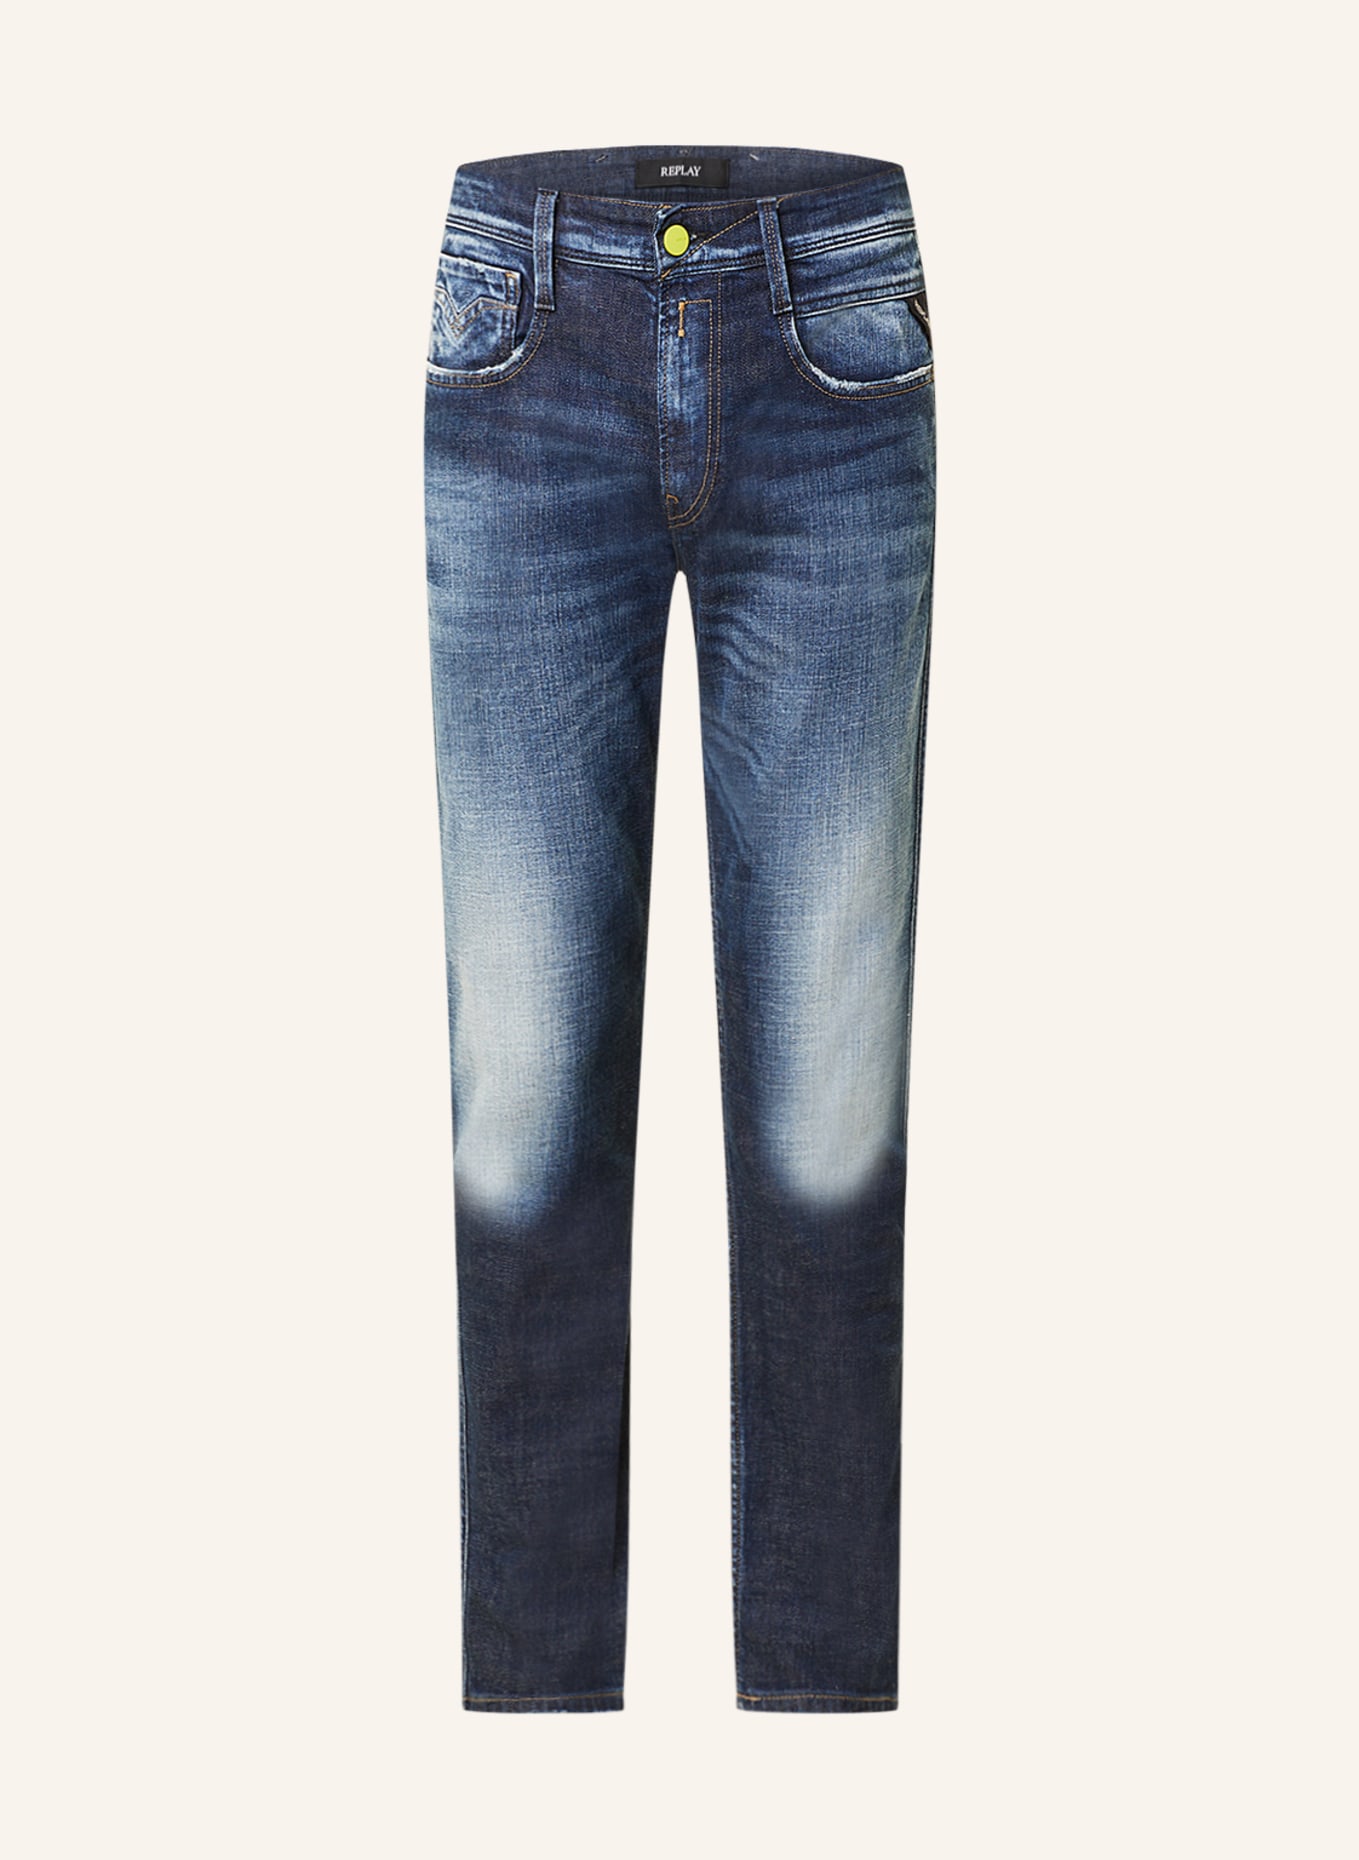 REPLAY Jeans ANBASS slim fit, Color: 007 DARK BLUE (Image 1)